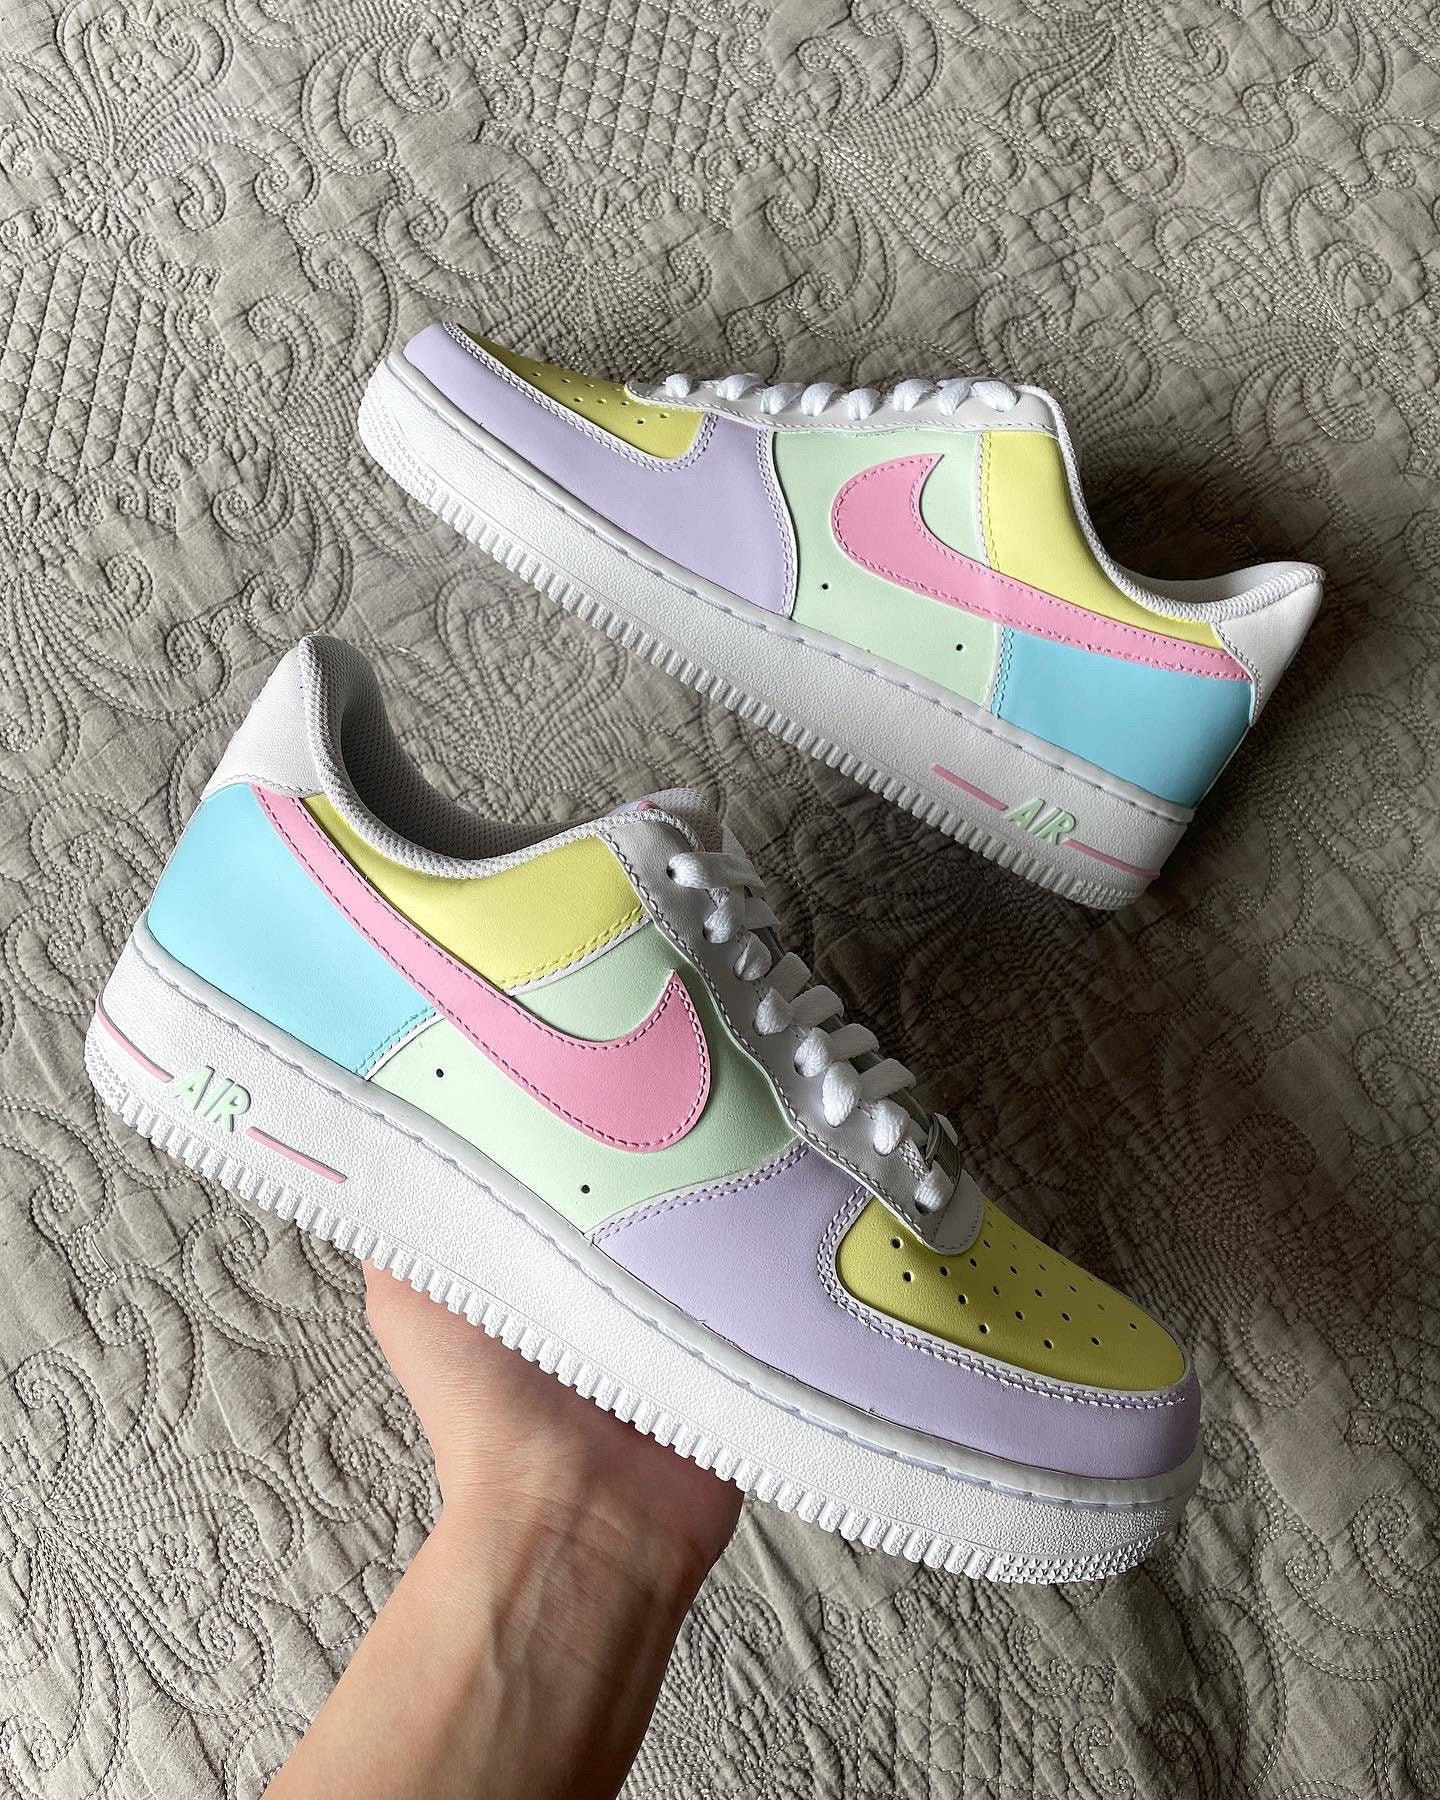 Nike Air Force 1 Custom Sneakers Pink Blue Yellow Lilac Cotton | Etsy